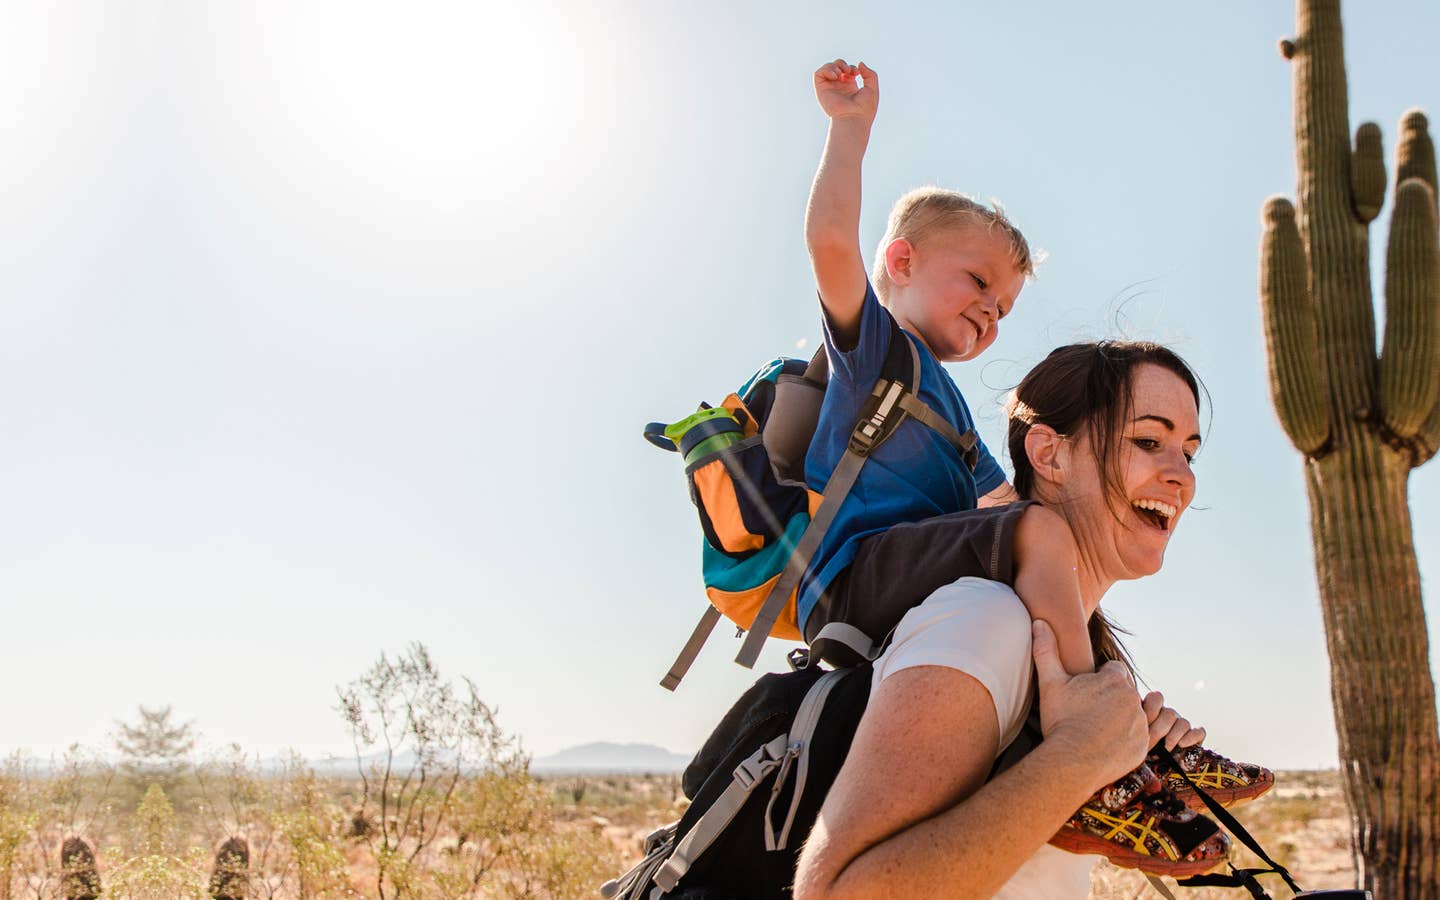 Jessica and her son laughing together while he sits on her shoulders as they hike in the Arizona desert.